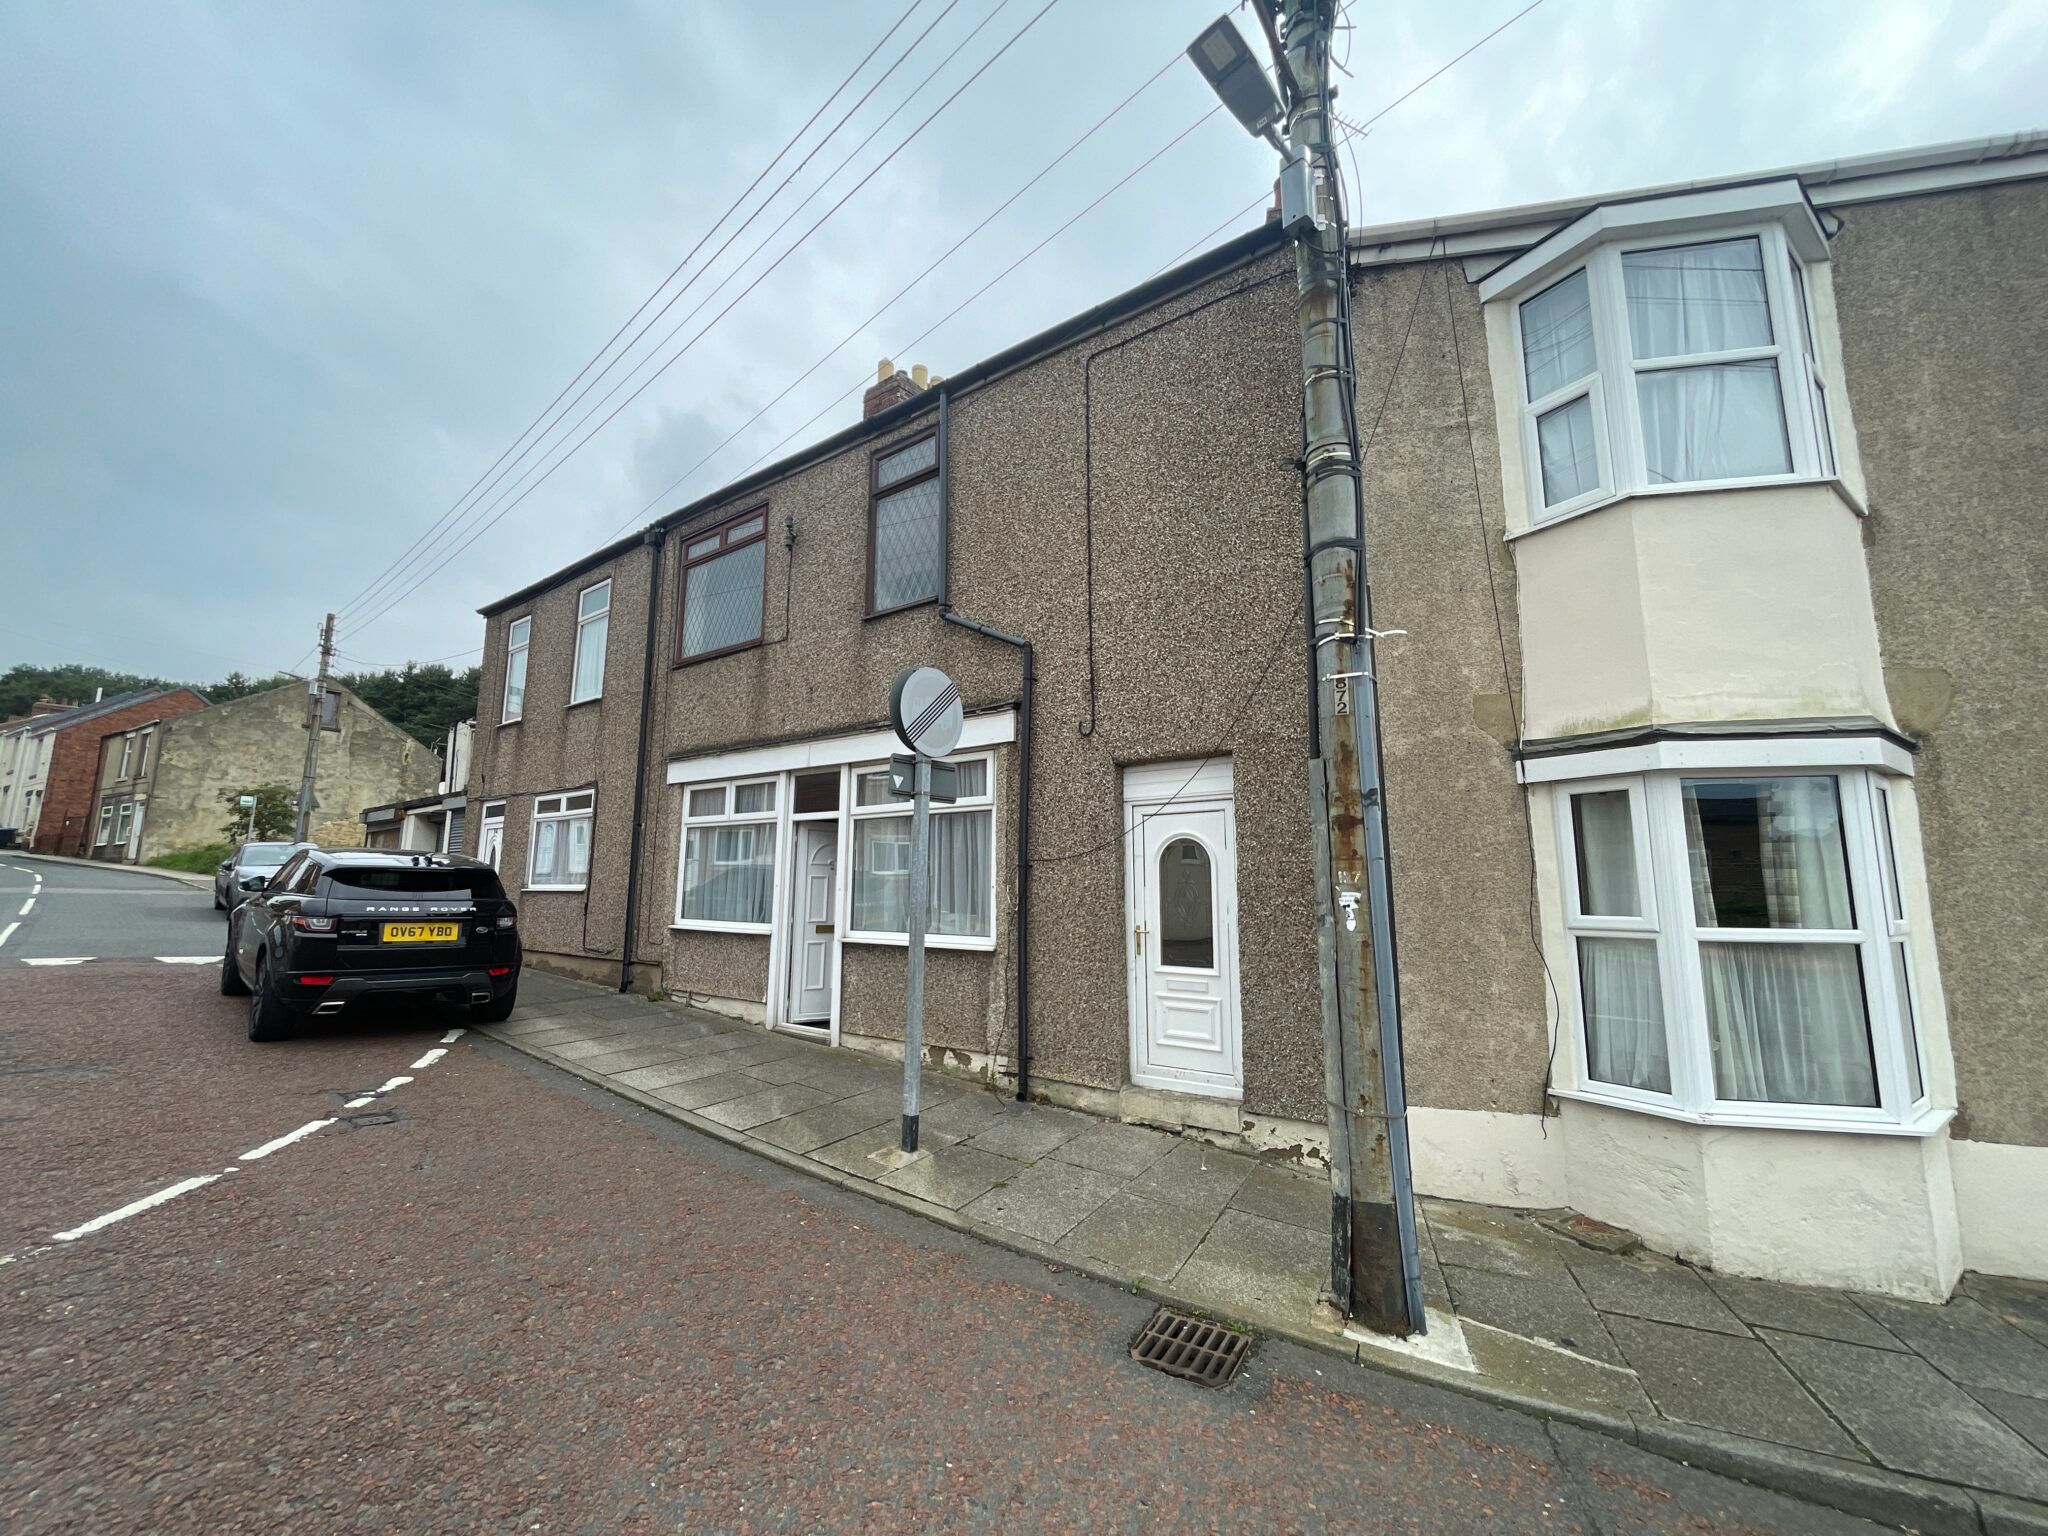 36A & 36B Close House, Bishop Auckland, DL14 8RS